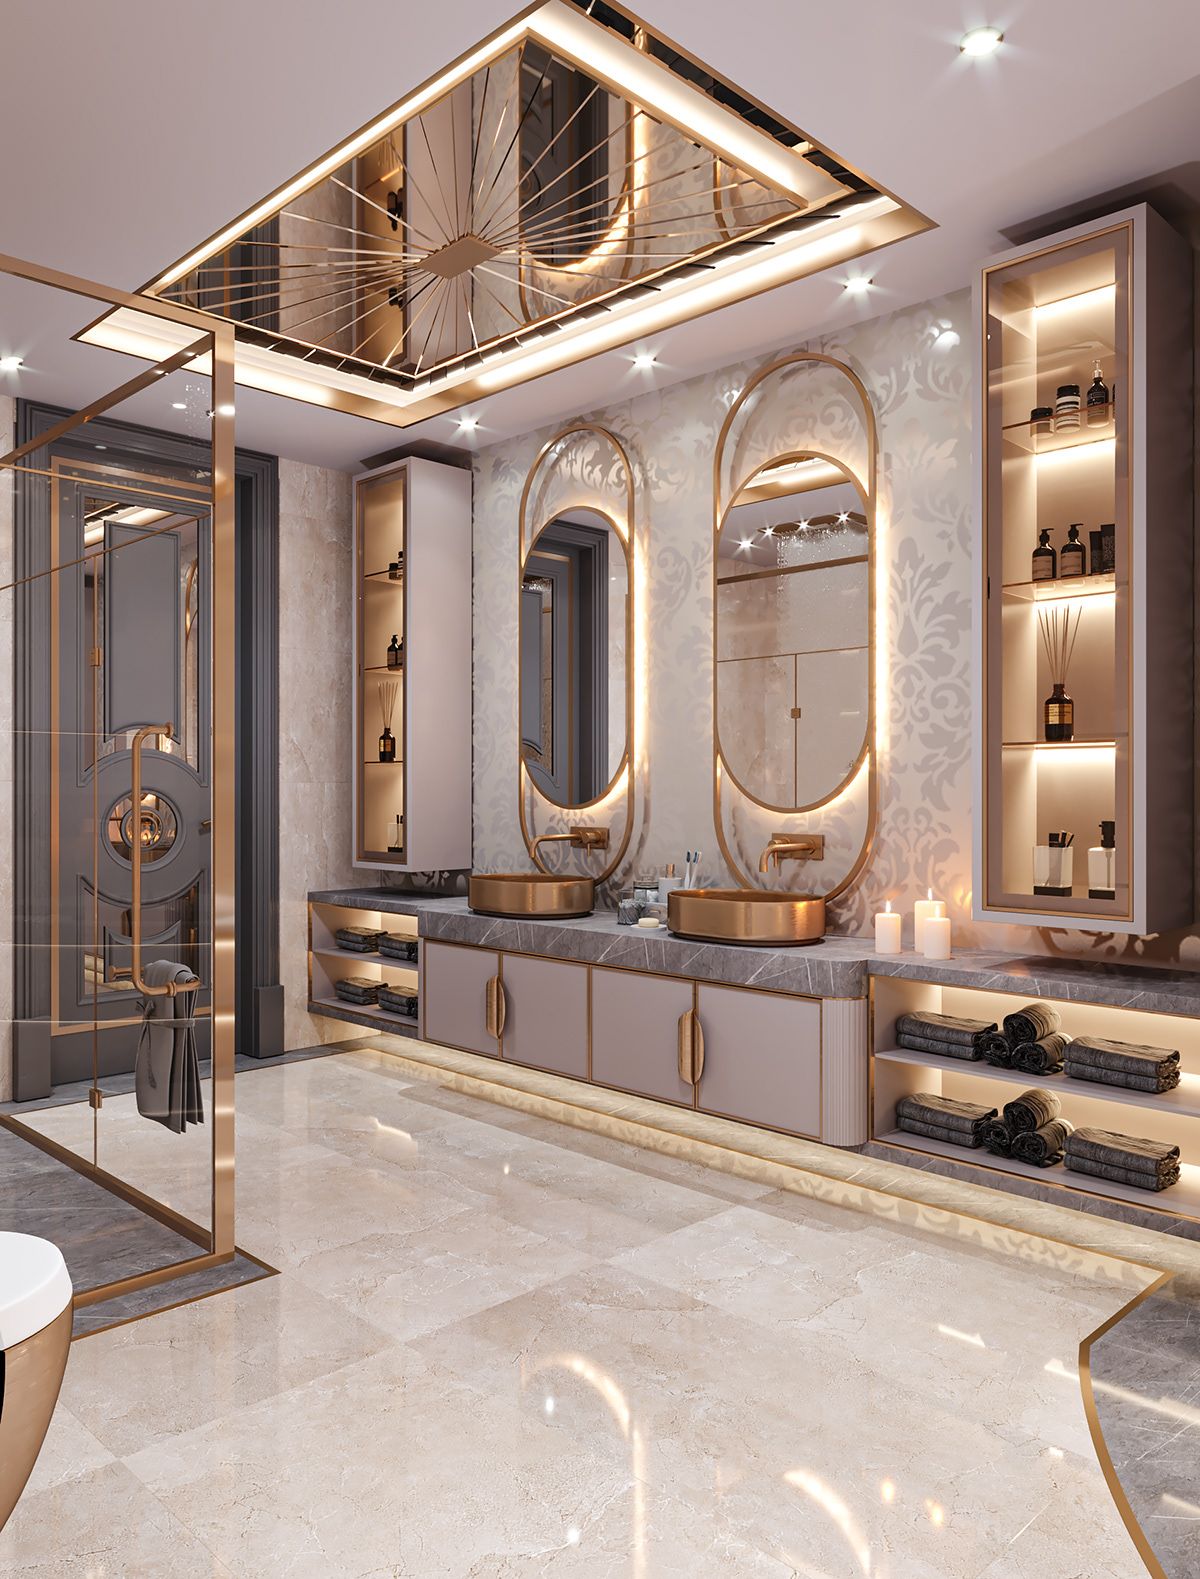 Luxury Bathrooms: Creating Opulent and Relaxing Spaces in Your Home